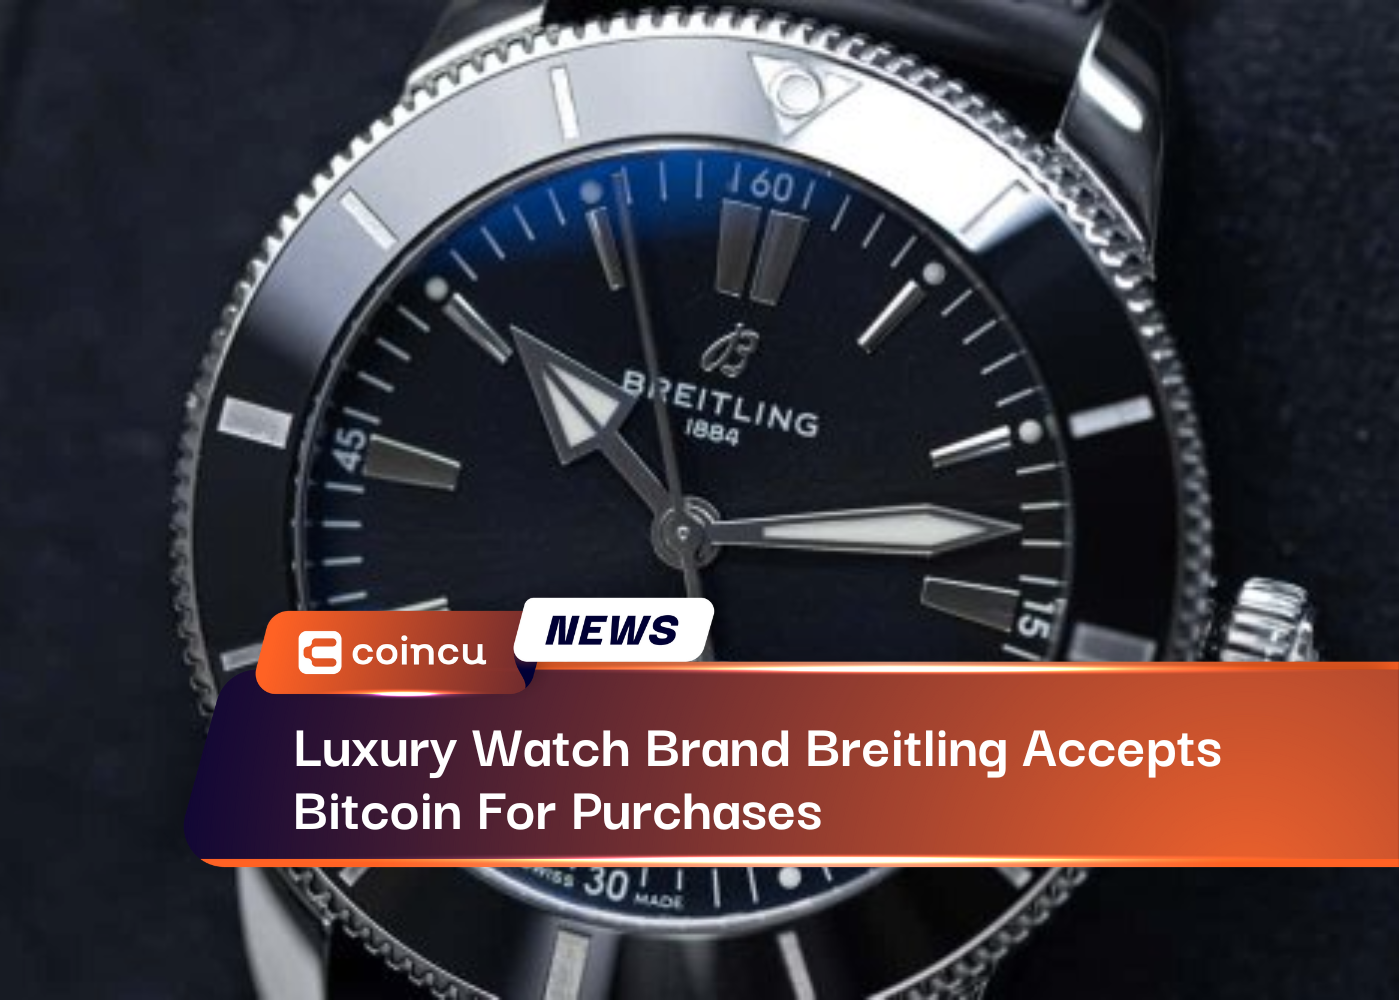 Luxury Watch Brand Breitling Accepts Bitcoin For Purchases